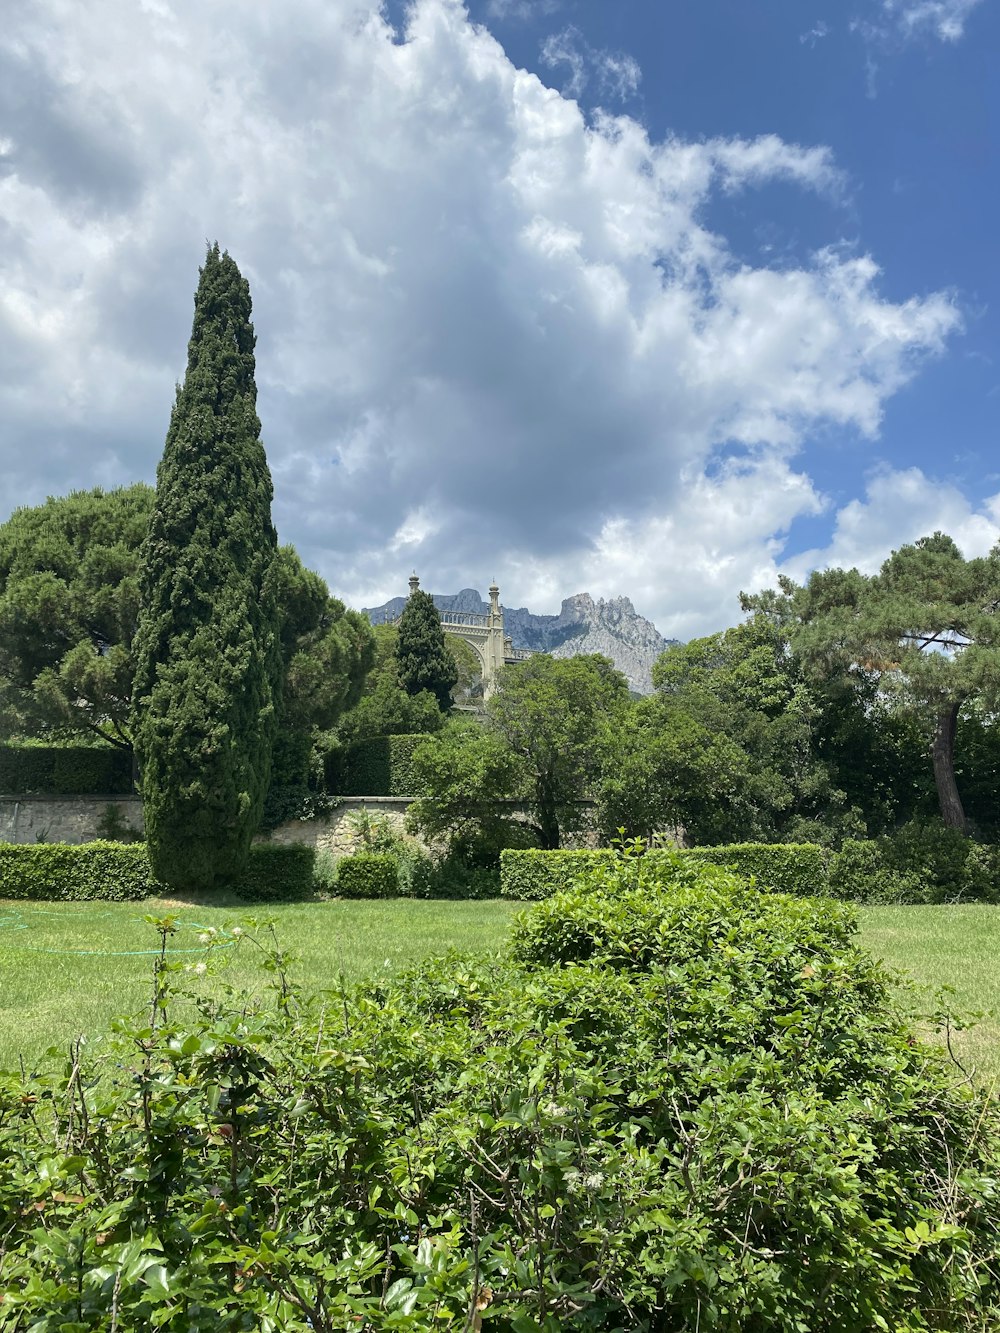 a large green landscape with trees and a castle in the background